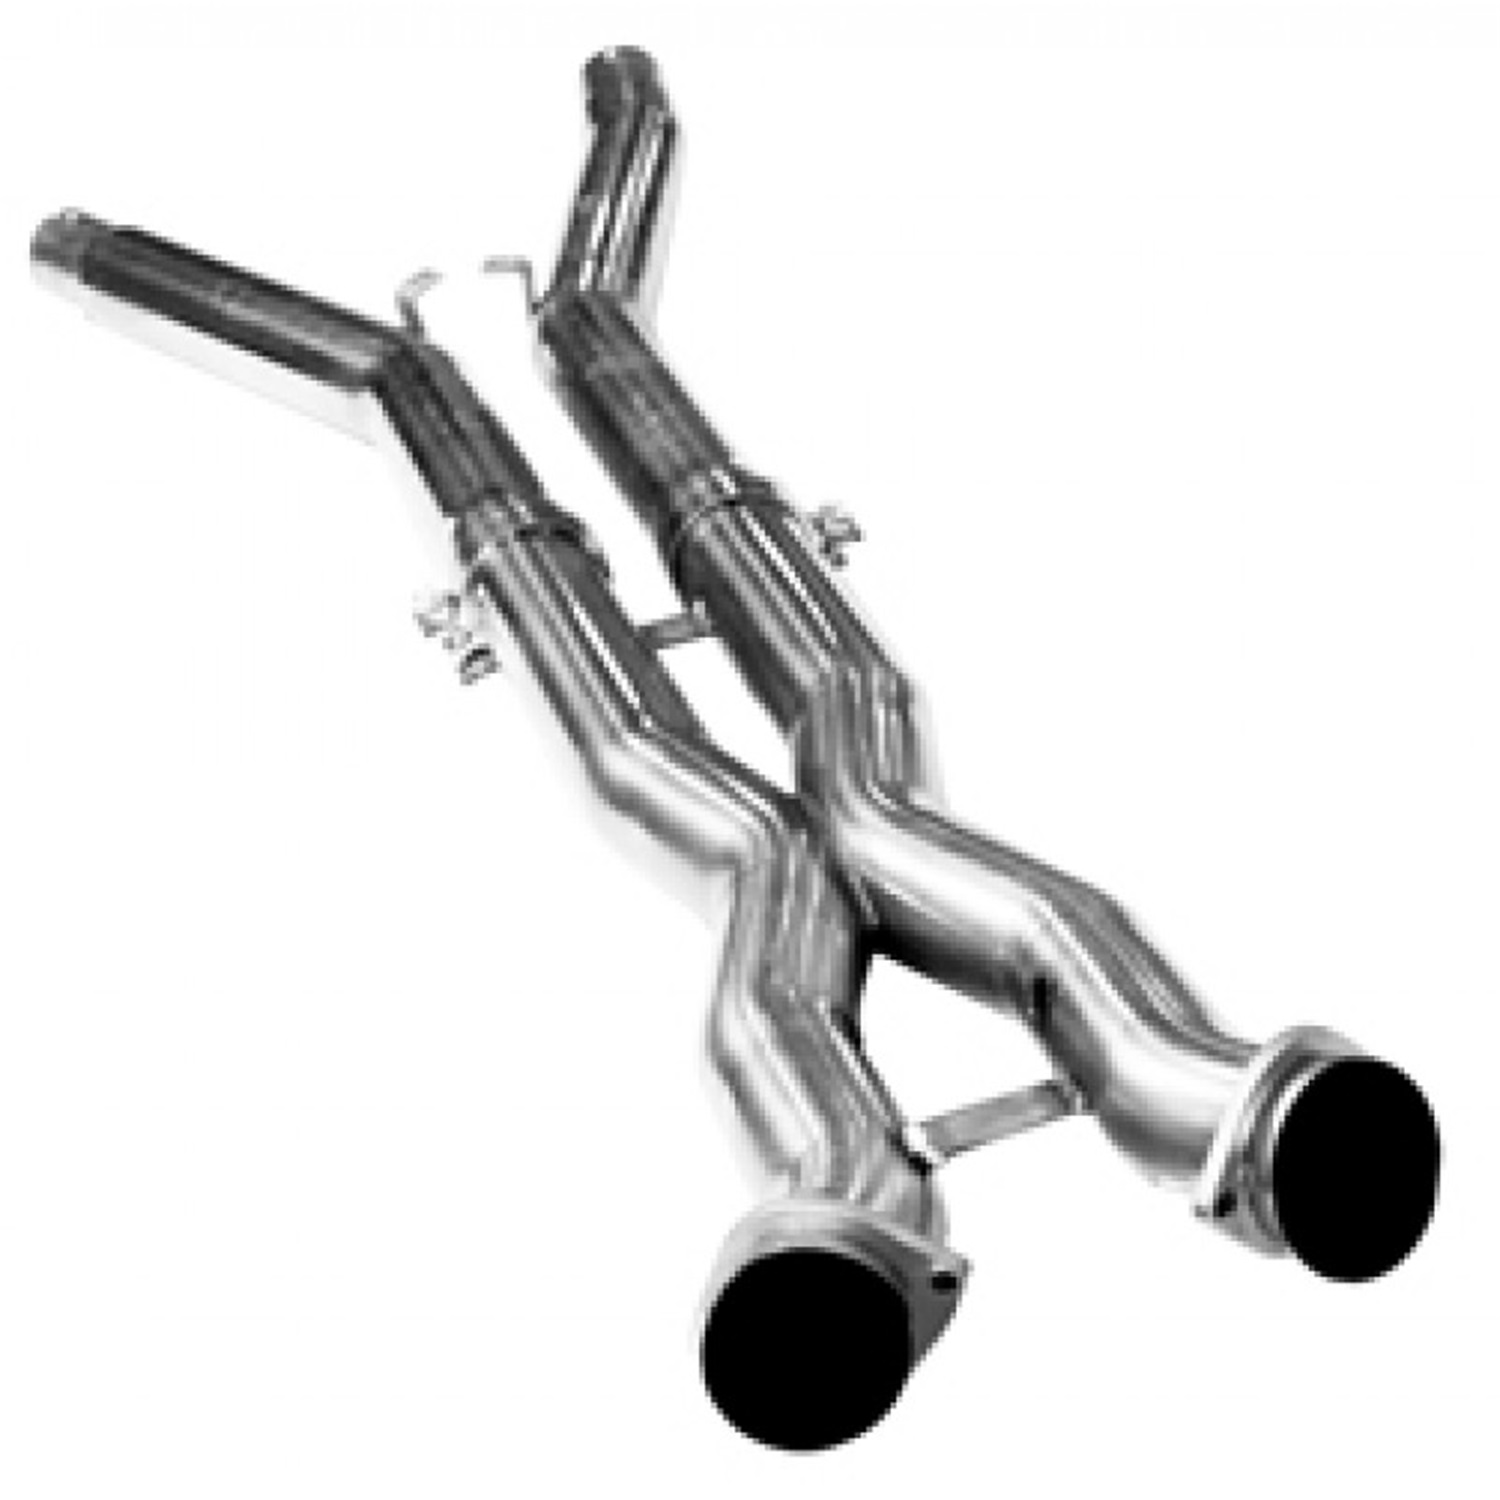 Off Road X-Pipe 3 x 3" Connects To 2.5" OEM Style Exhaust Incl. 3 x 2.5" Mid Pipes 09-13 Corvette C6 LS2/LS3 6.0L/6.2L